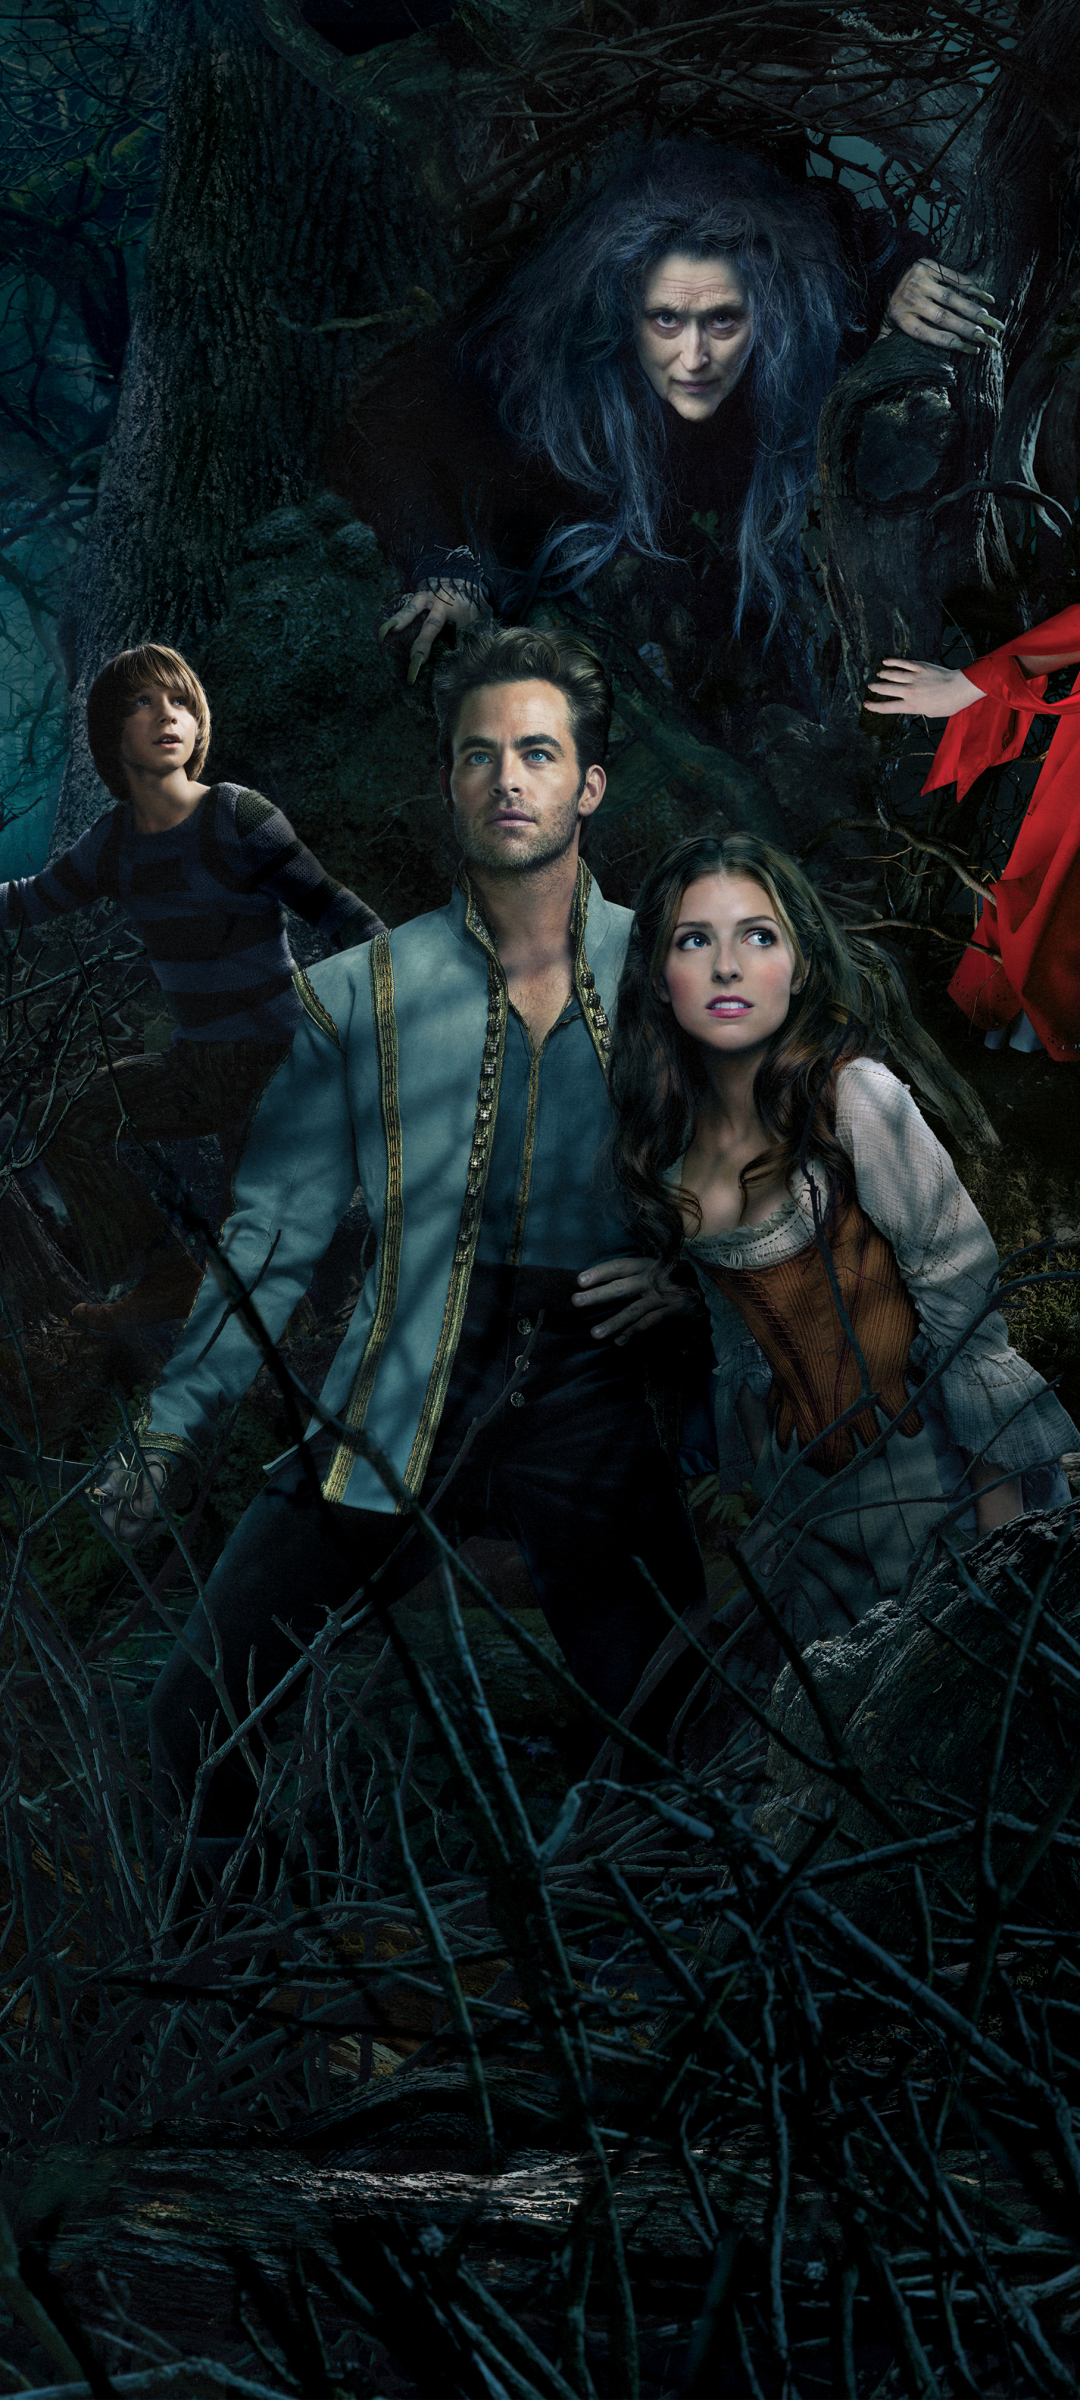 movie, into the woods (2014)